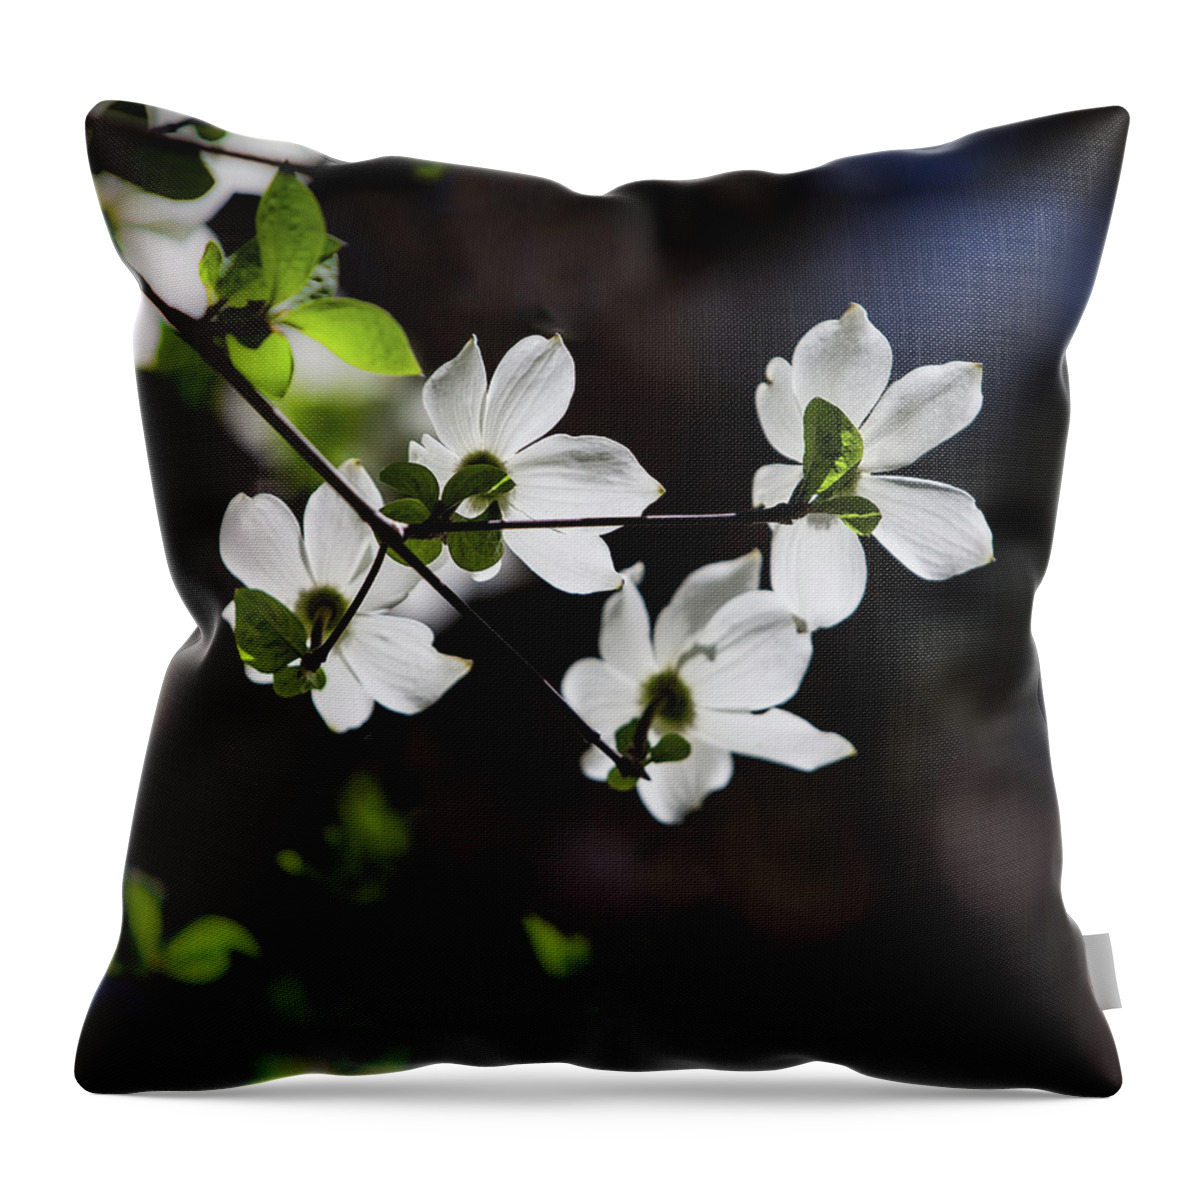 Yosemite Throw Pillow featuring the photograph Blooming Dogwoods in Yosemite 4 by Larry Marshall